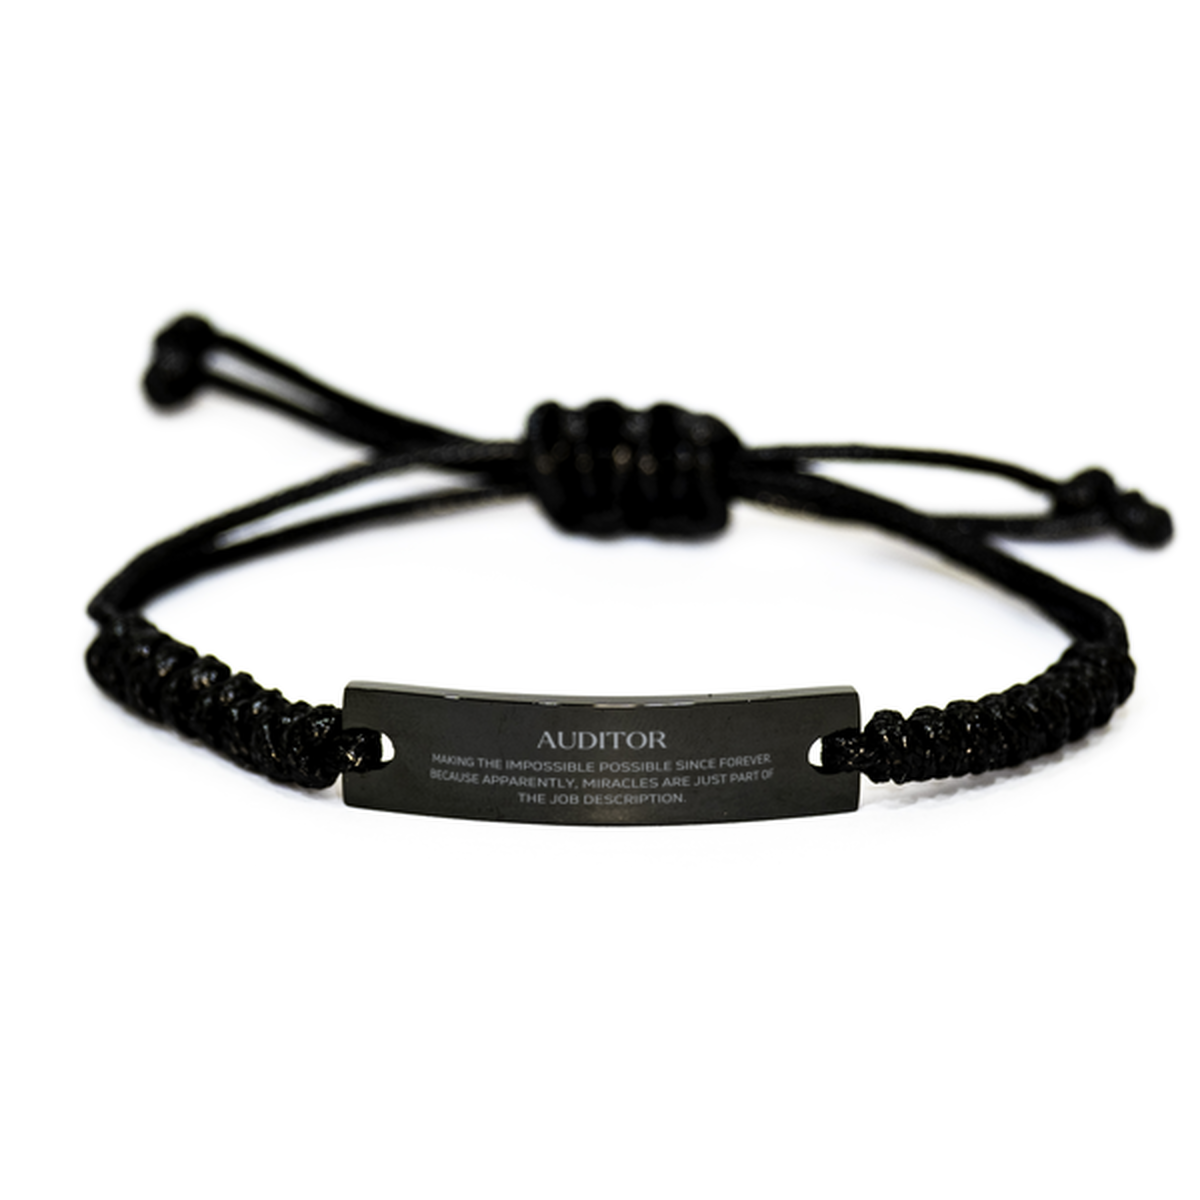 Funny Auditor Gifts, Miracles are just part of the job description, Inspirational Birthday Black Rope Bracelet For Auditor, Men, Women, Coworkers, Friends, Boss